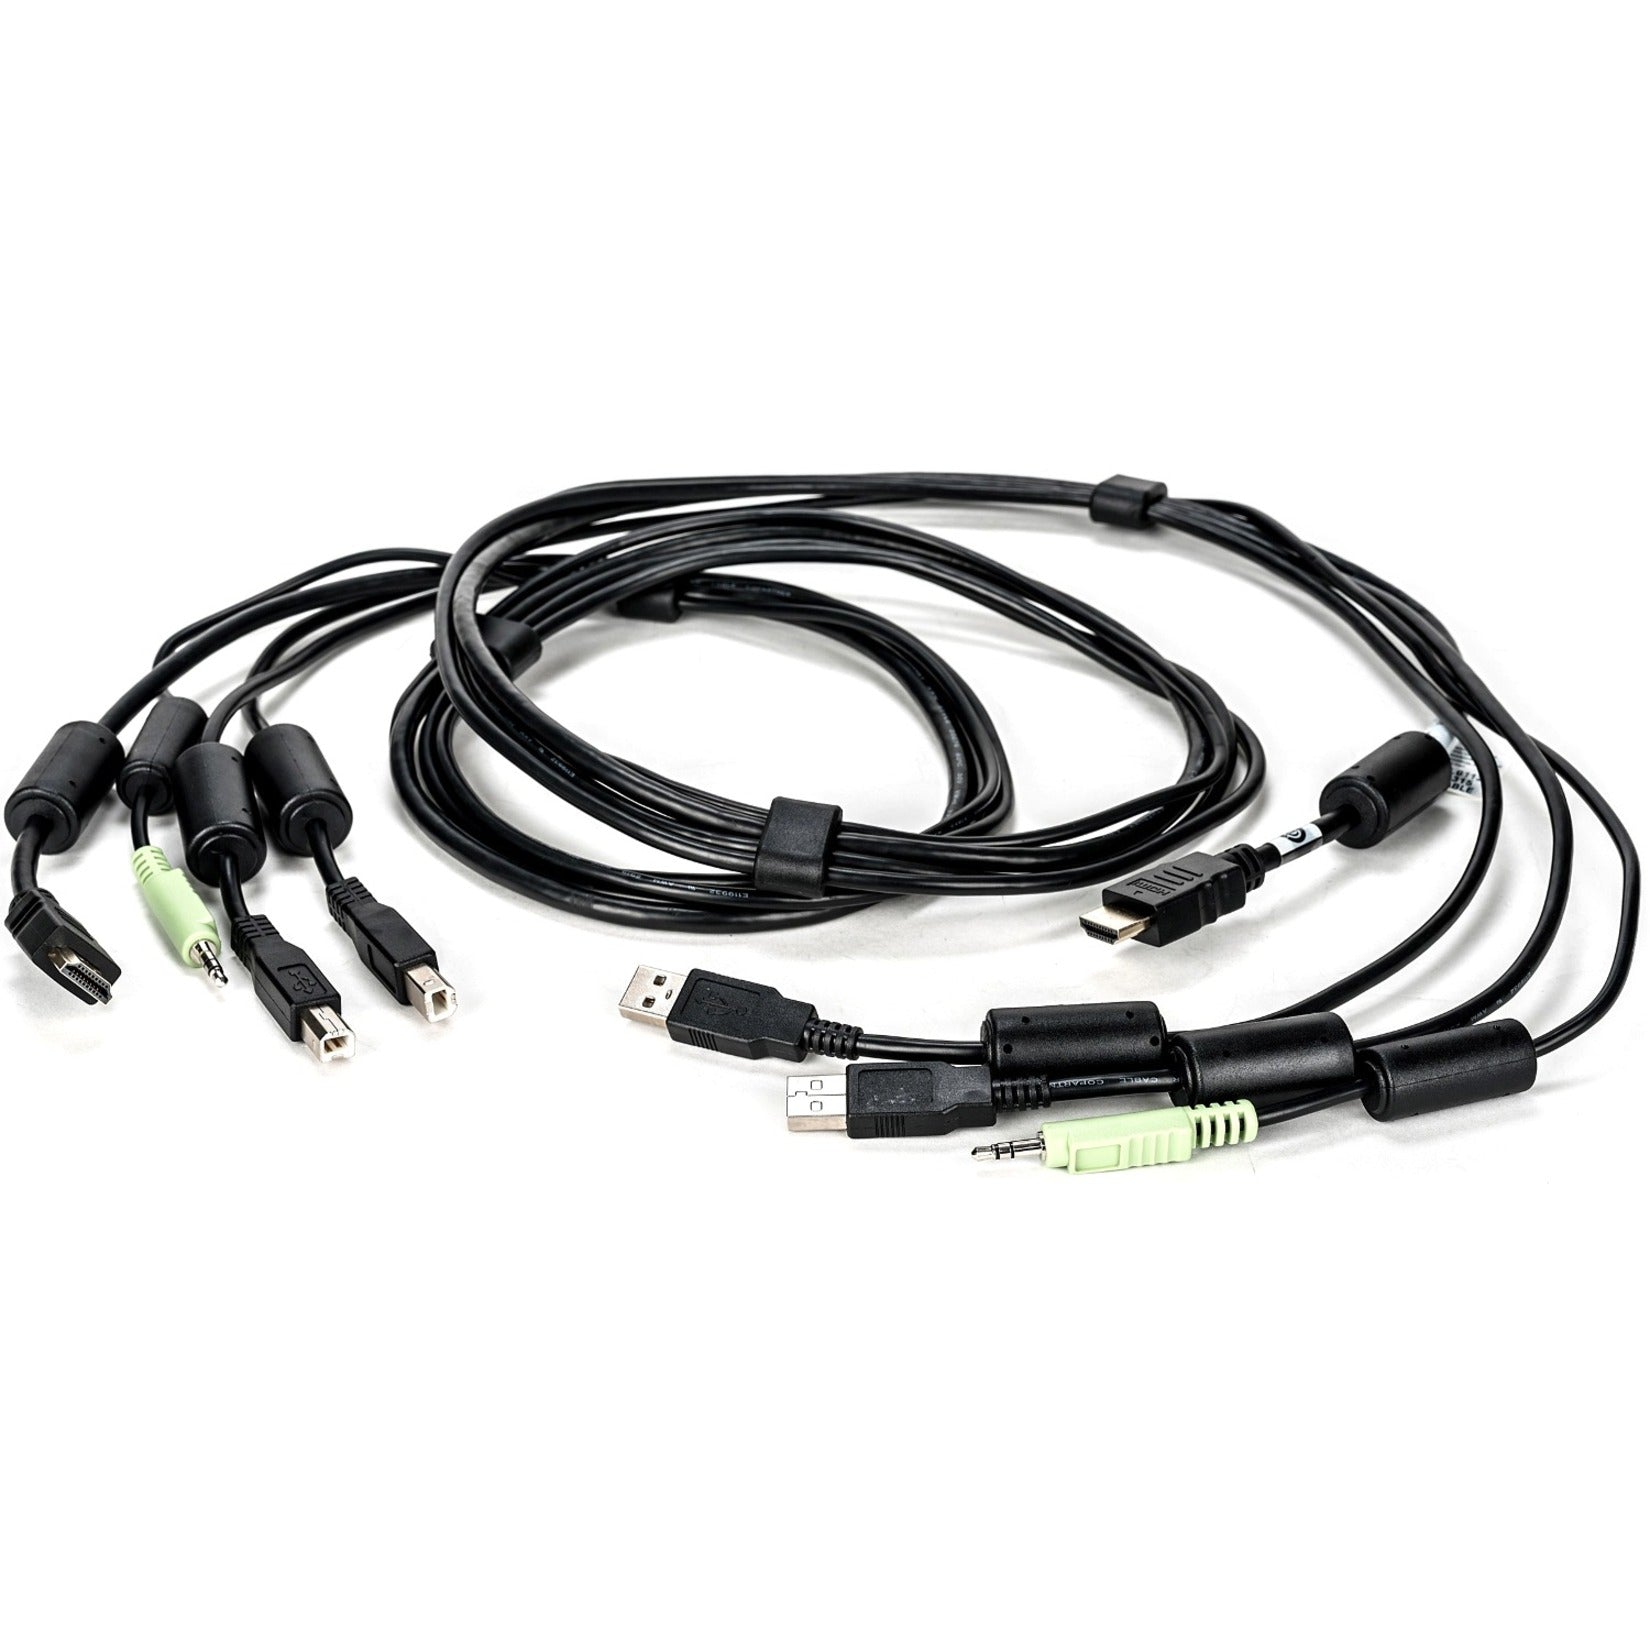 AVOCENT CBL0112 SC845H Cable - 6ft, USB to HDMI Digital Audio/Video